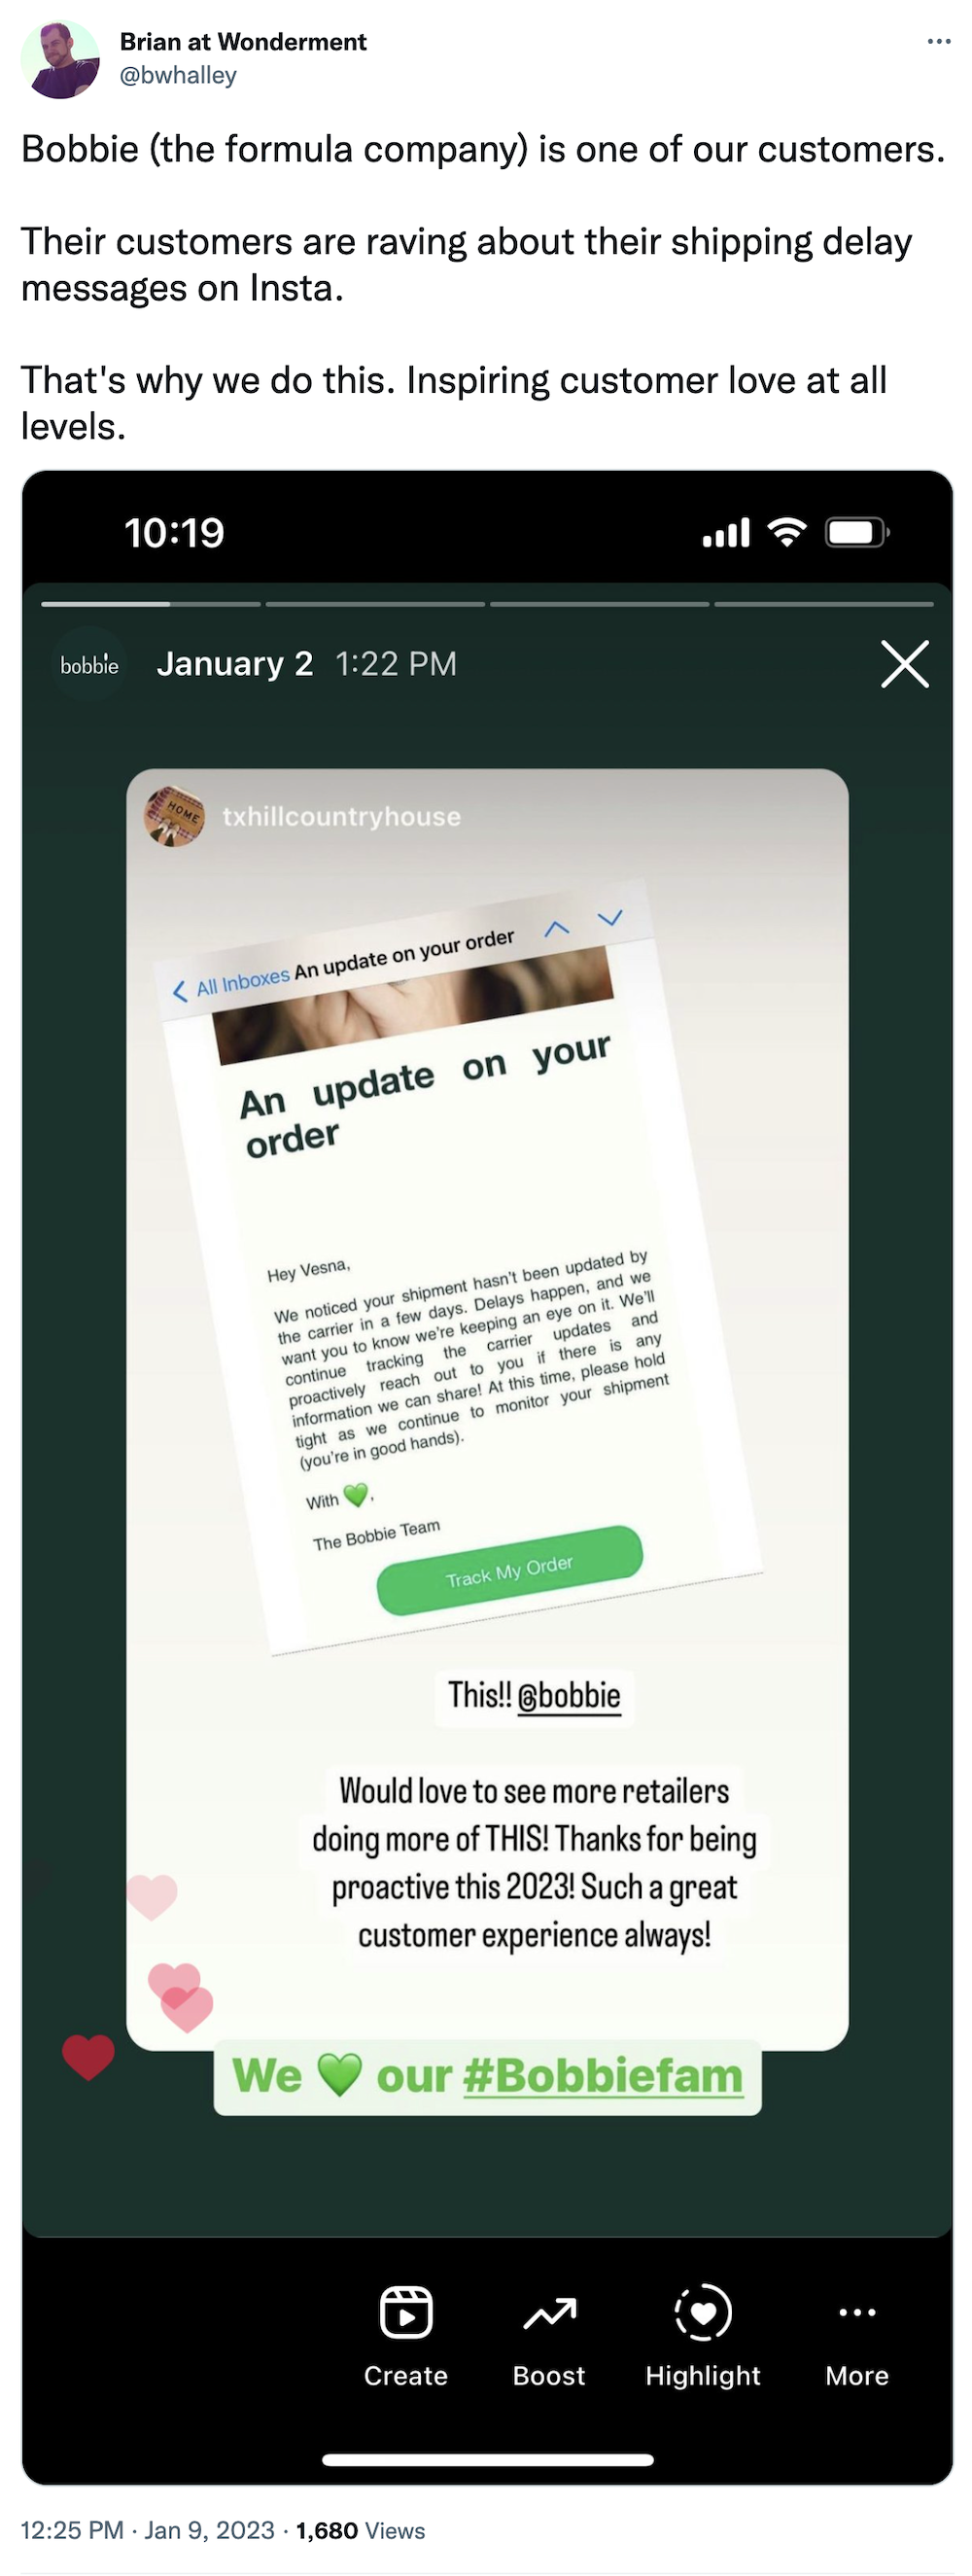 Tweet from @bwhalley:
Bobbie (the formula company) is one of our customers.

Their customers are raving about their shipping delay messages on Insta. 

That's why we do this. Inspiring customer love at all levels.